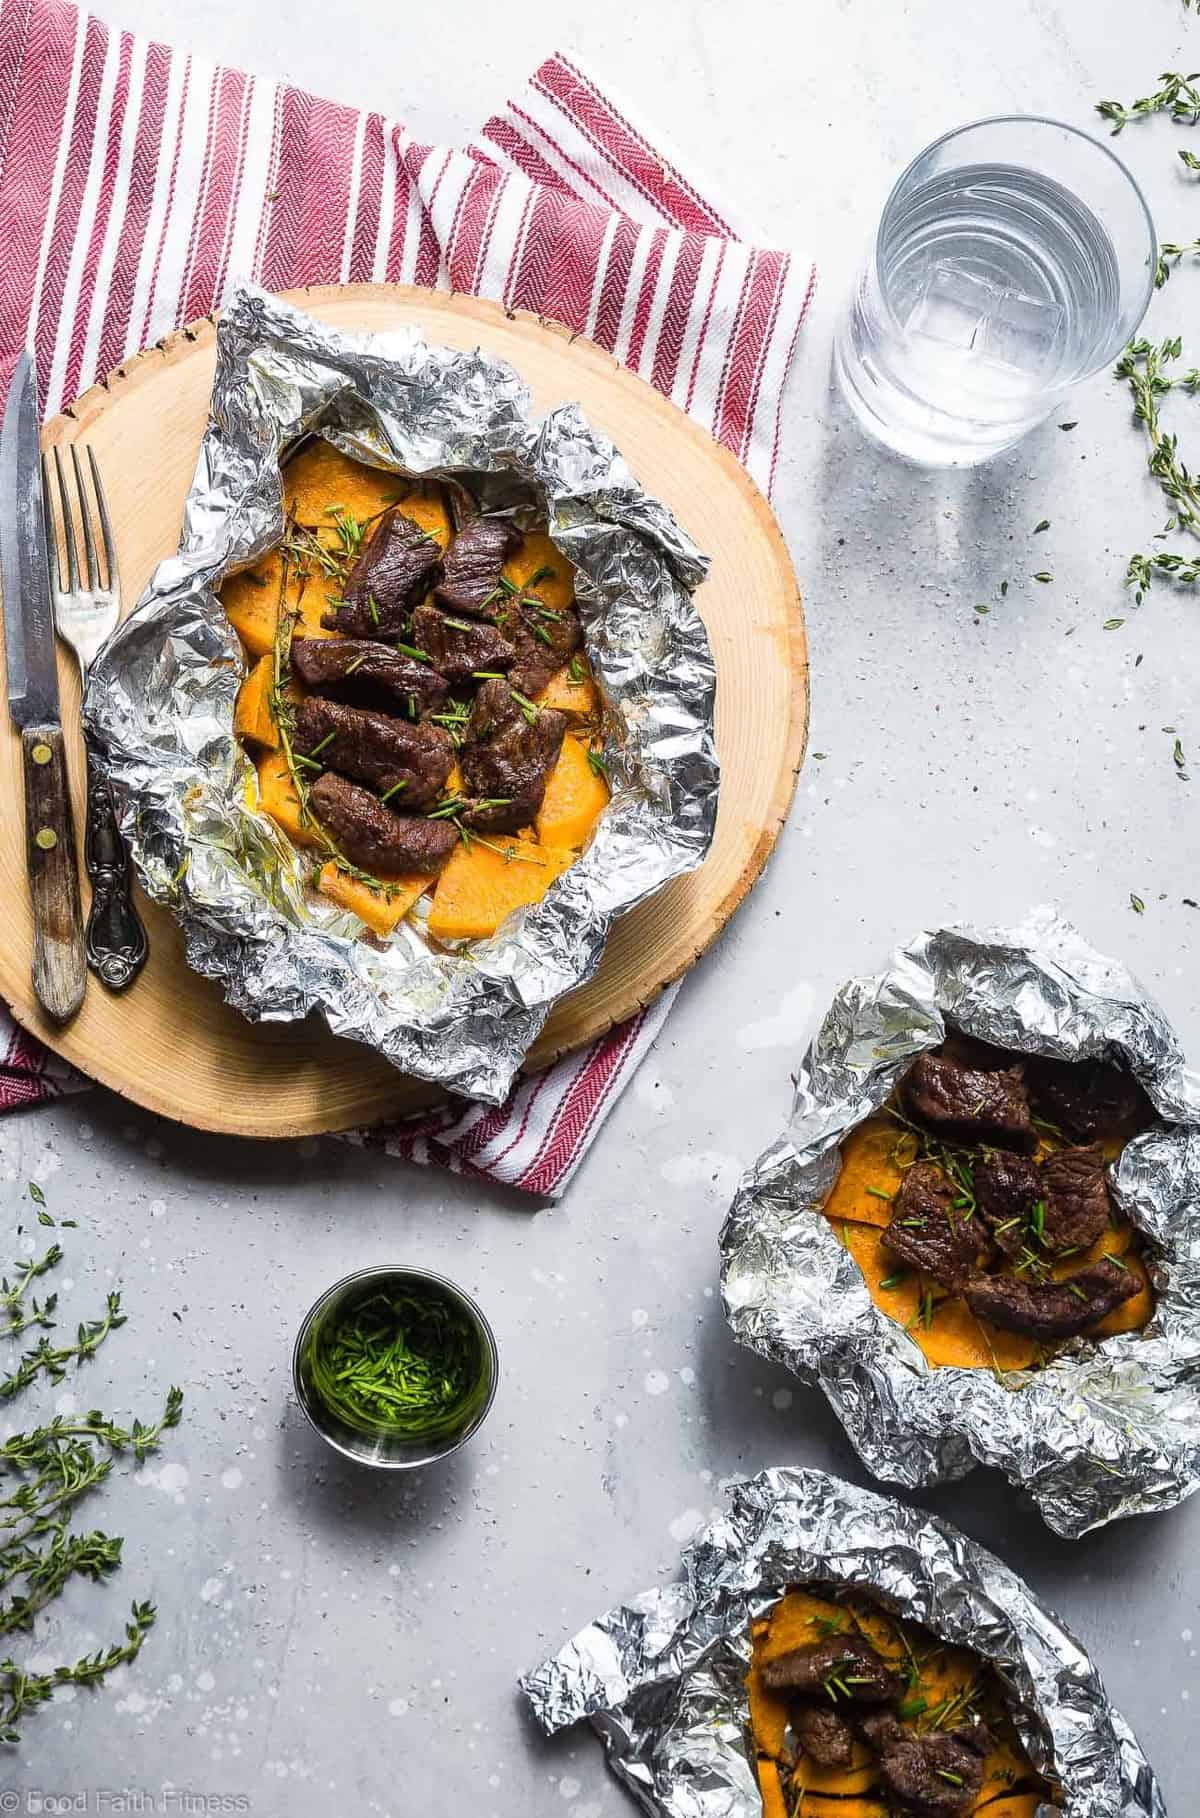 Garlic Steak and Potato Foil Packets - These EASY Steak Foil Packets are an easy, healthy and whole30 approved summer dinner with only 6 ingredients and 300 calories! Sure to please even the pickiest of eaters! | #Foodfaithfitness | #Glutenfree #Paleo #Whole30 #Grilling #Dairyfree